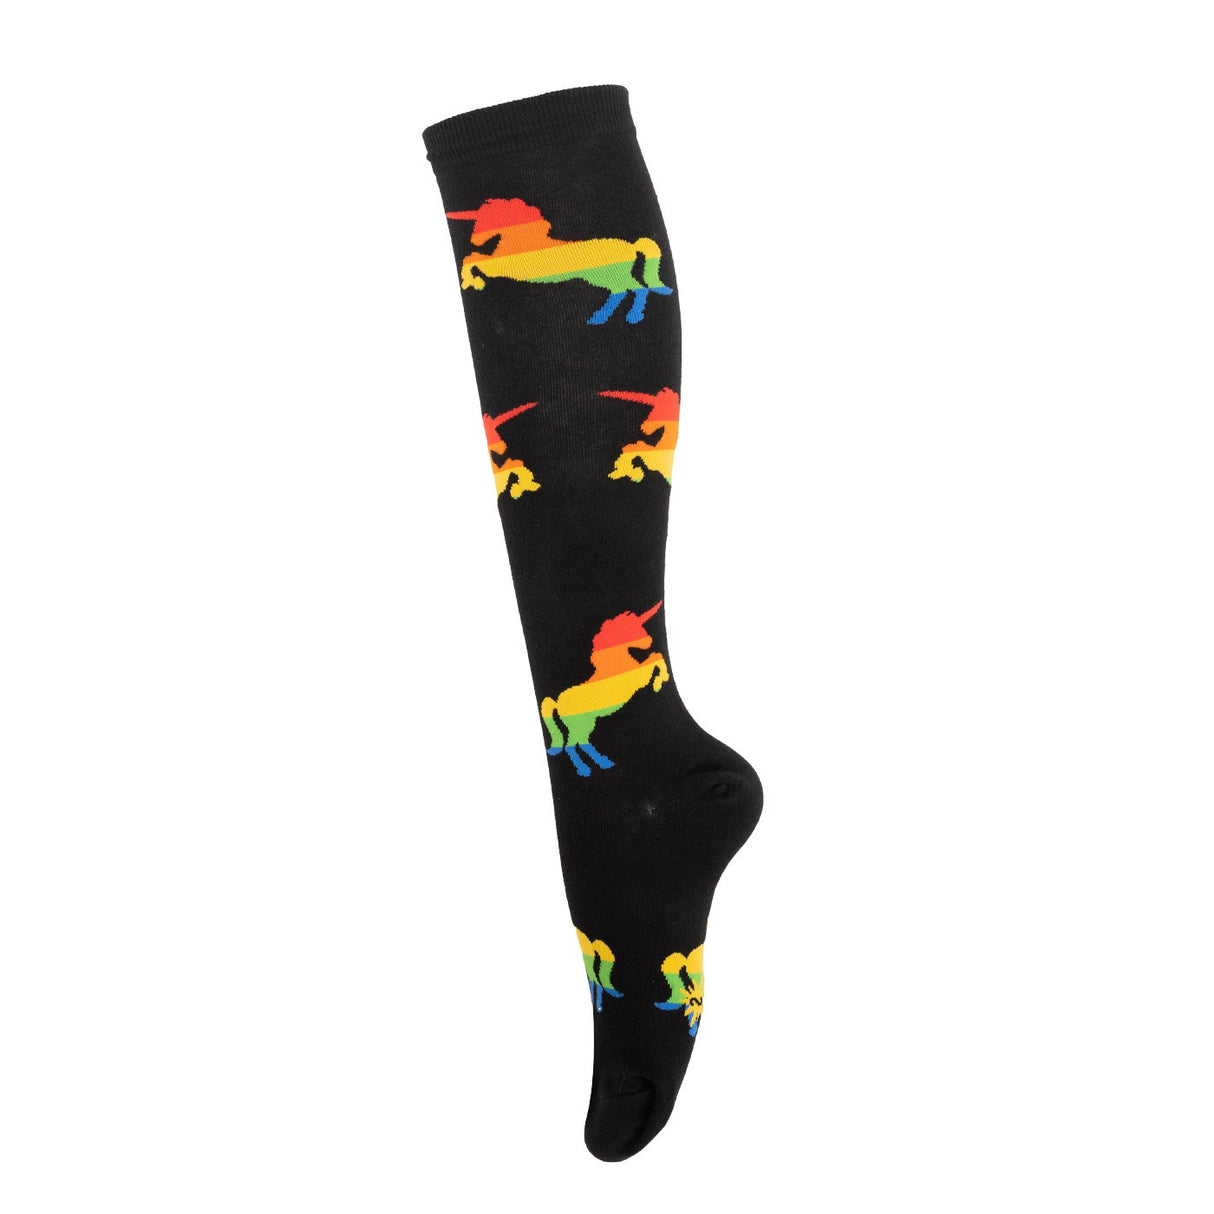 Sock It To Me Ride With Pride Stretch-It Knee High Socks